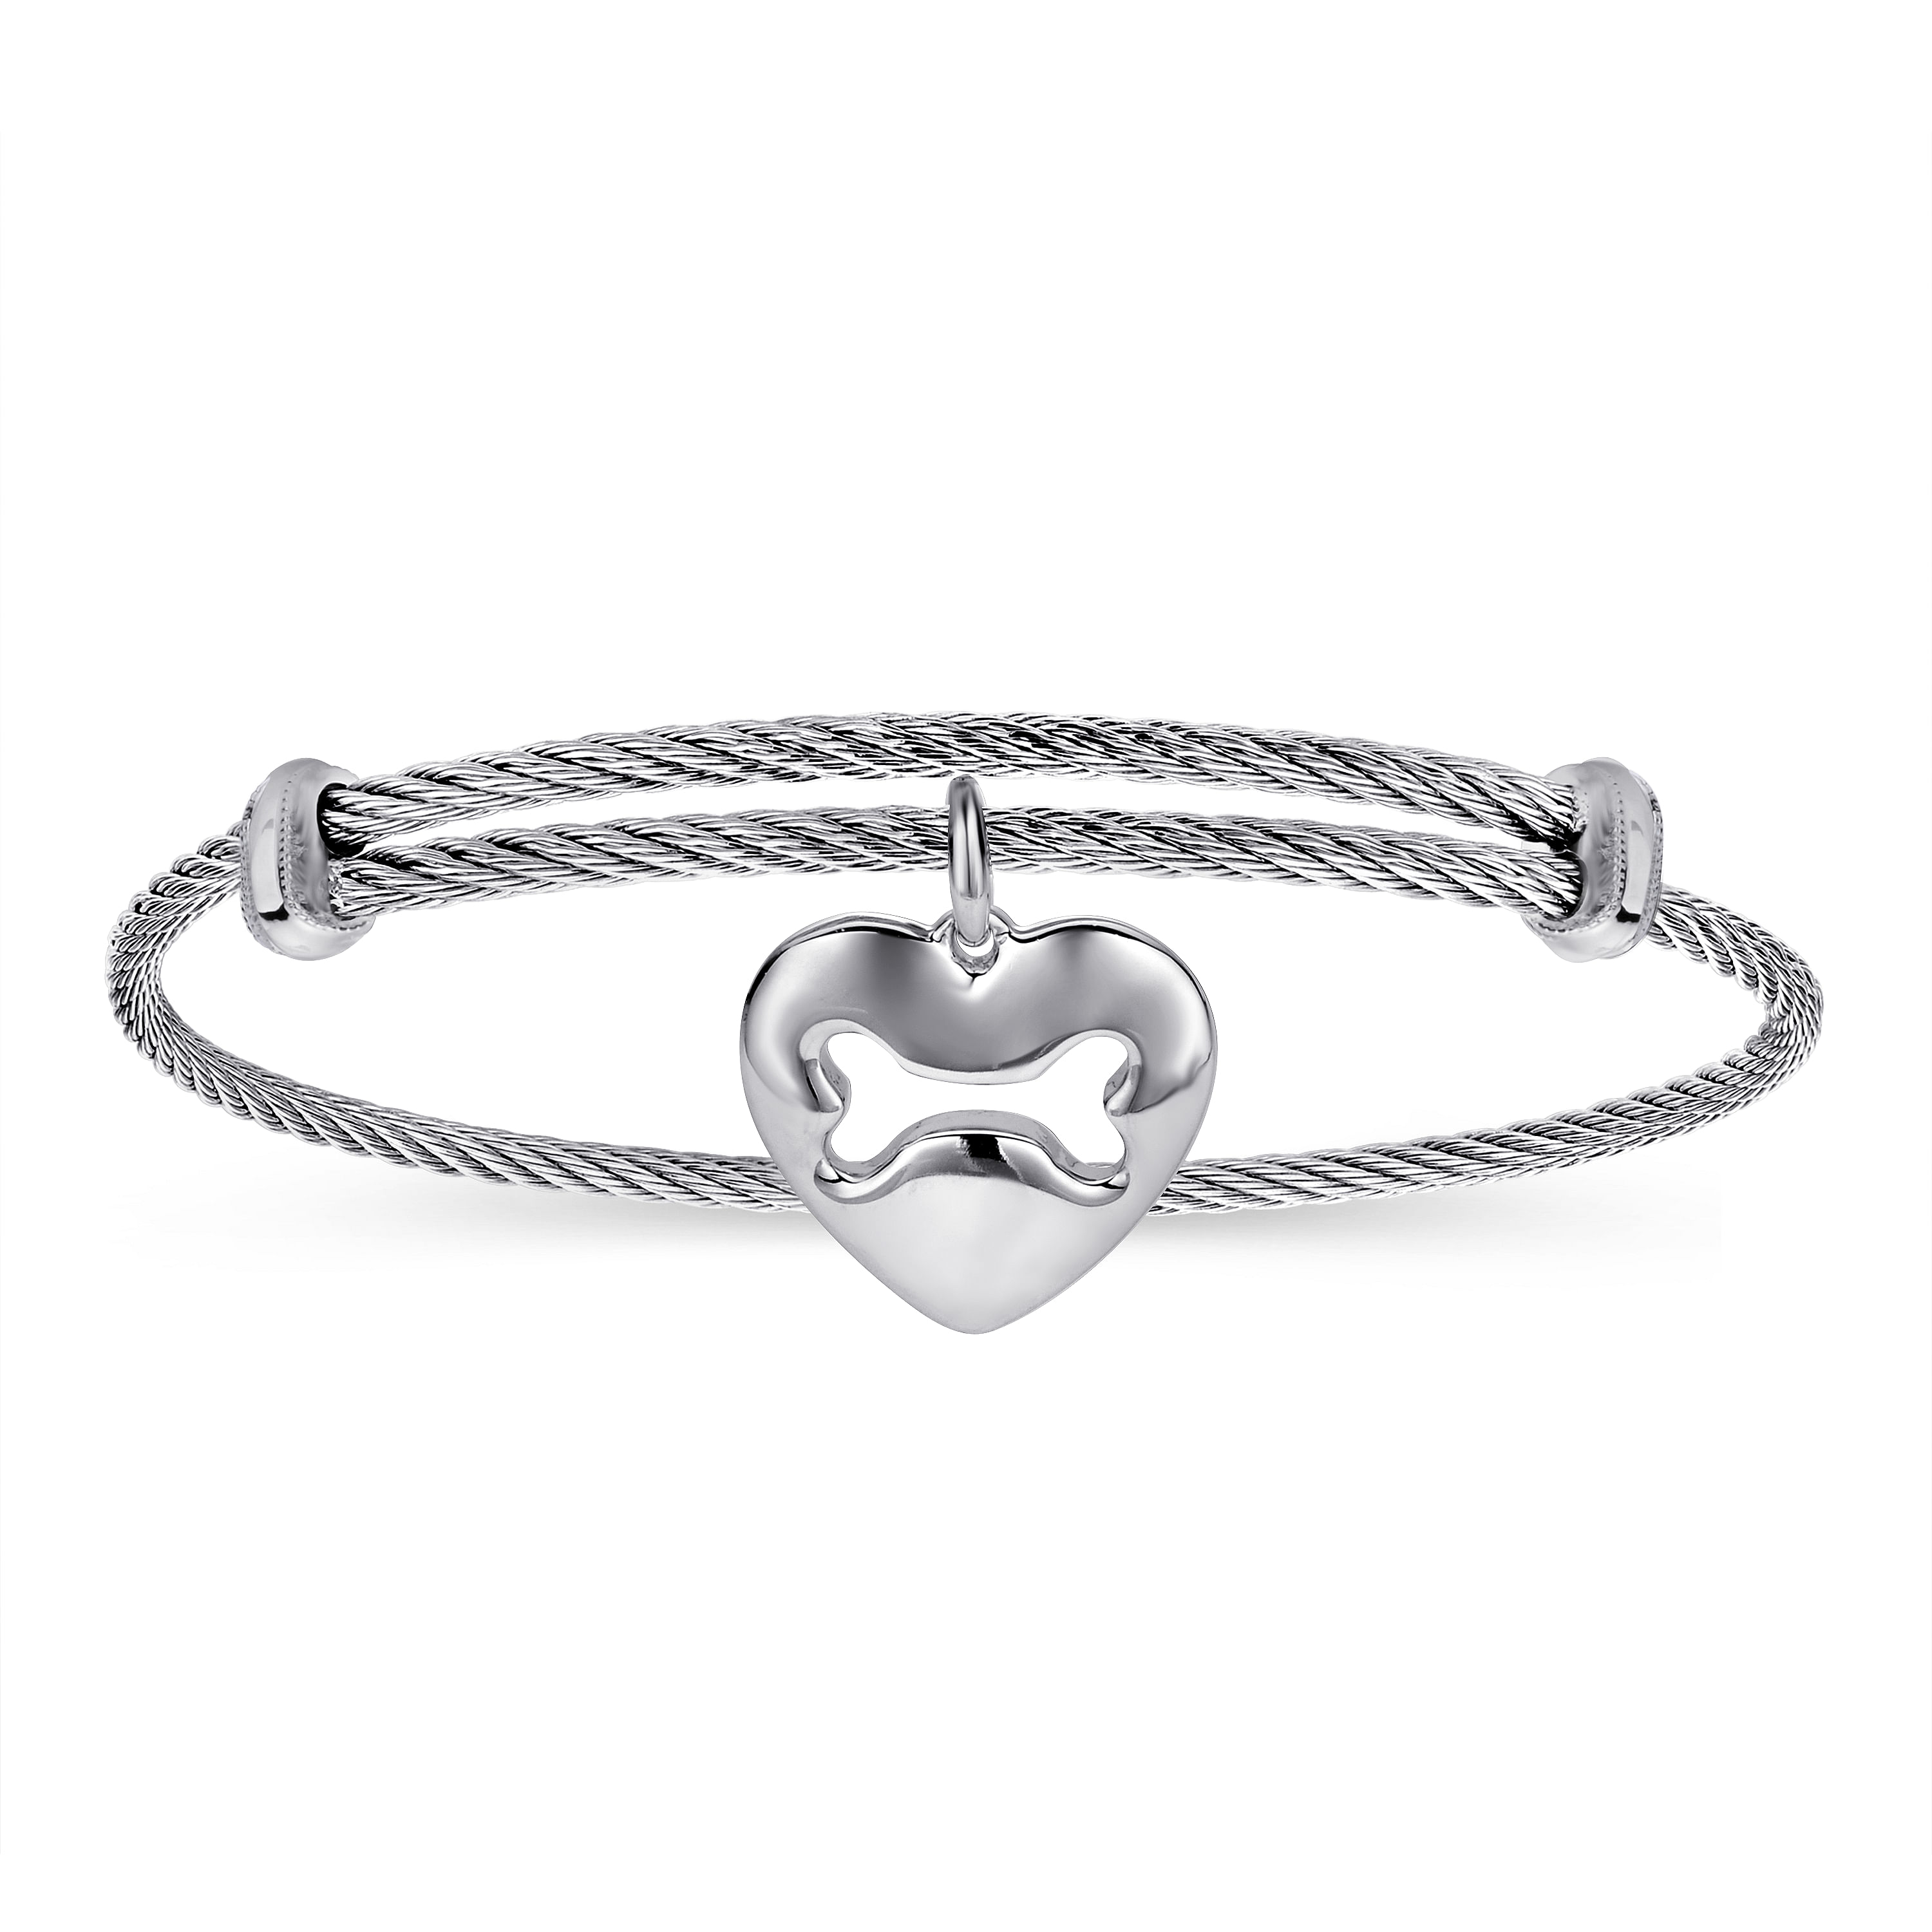 Key charm and double love heart silver bangle bracelet with pearls and adjustable with a twisted bangle design gift for her